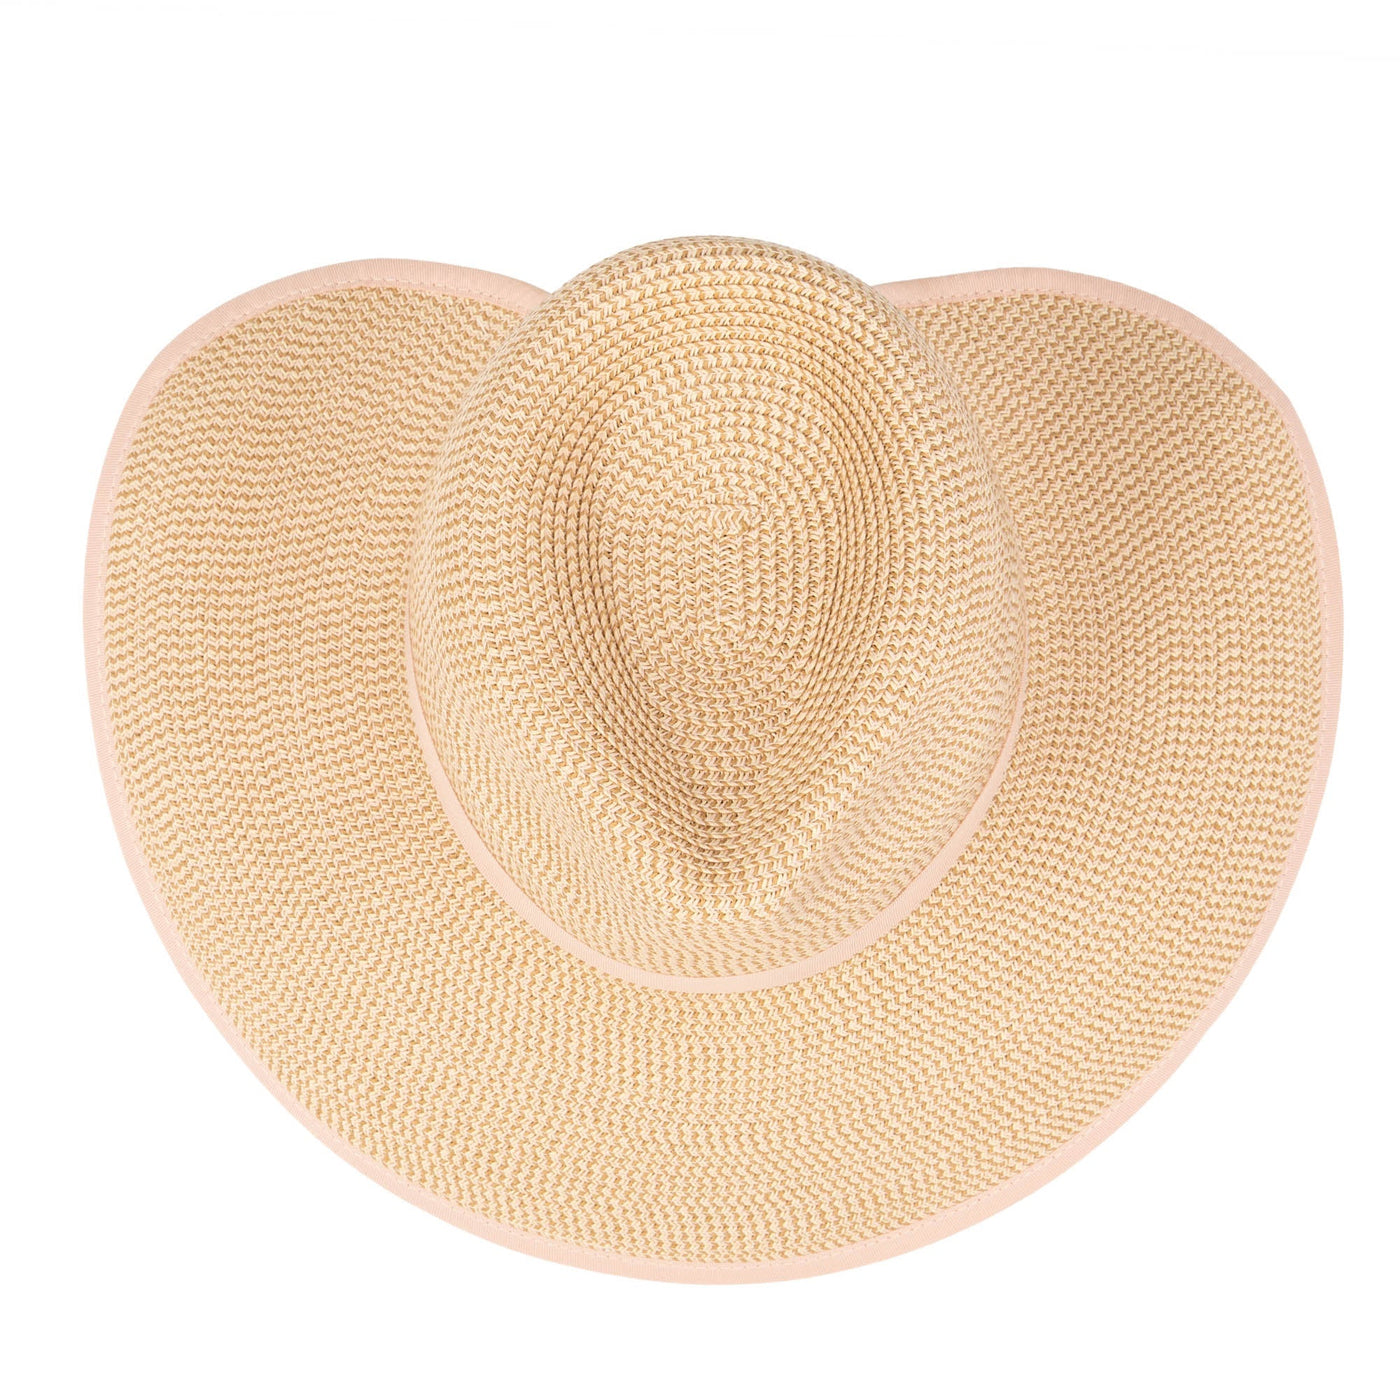 Ladies Fashion Sun Hat. Face Swap. Insert Your Face ID:1610818